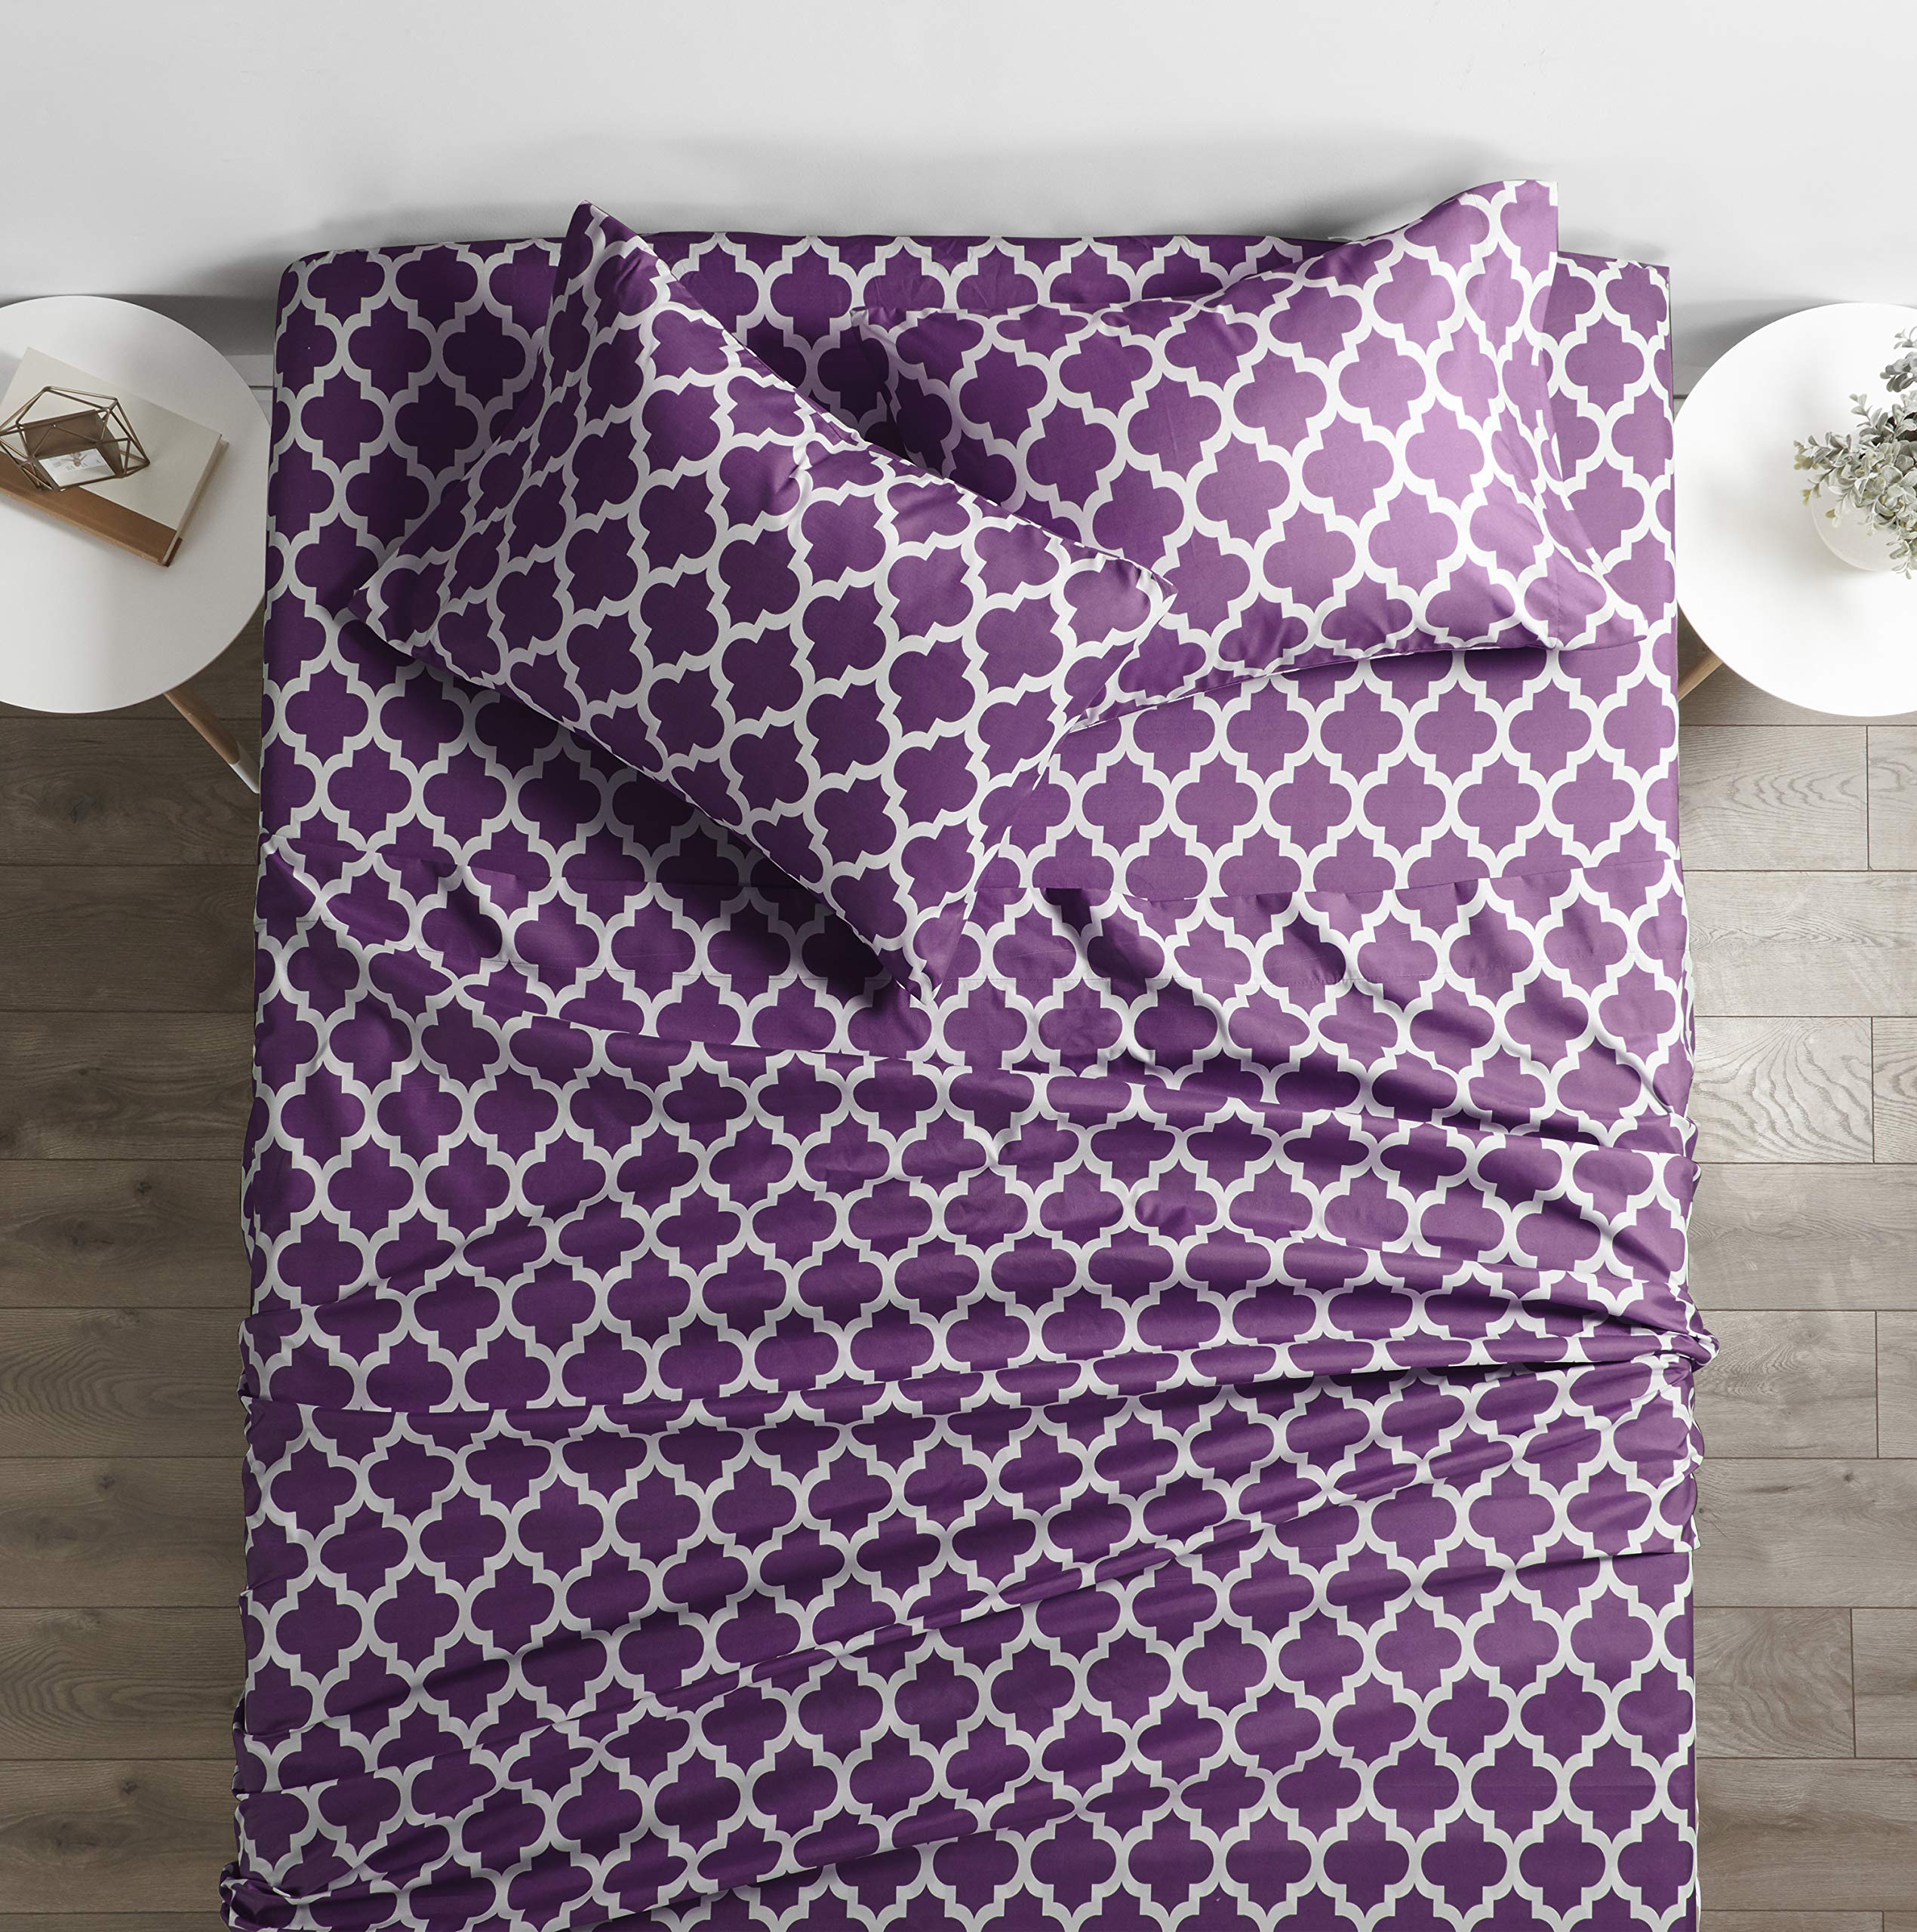 Book Cover Italian Luxury 1800 Series Hotel Collection Quatrefoil Pattern Bed Sheet Set - Deep Pockets, Wrinkle and Fade Resistant, Hypoallergenic Printed Sheet and Pillow Case Set - King - Purple